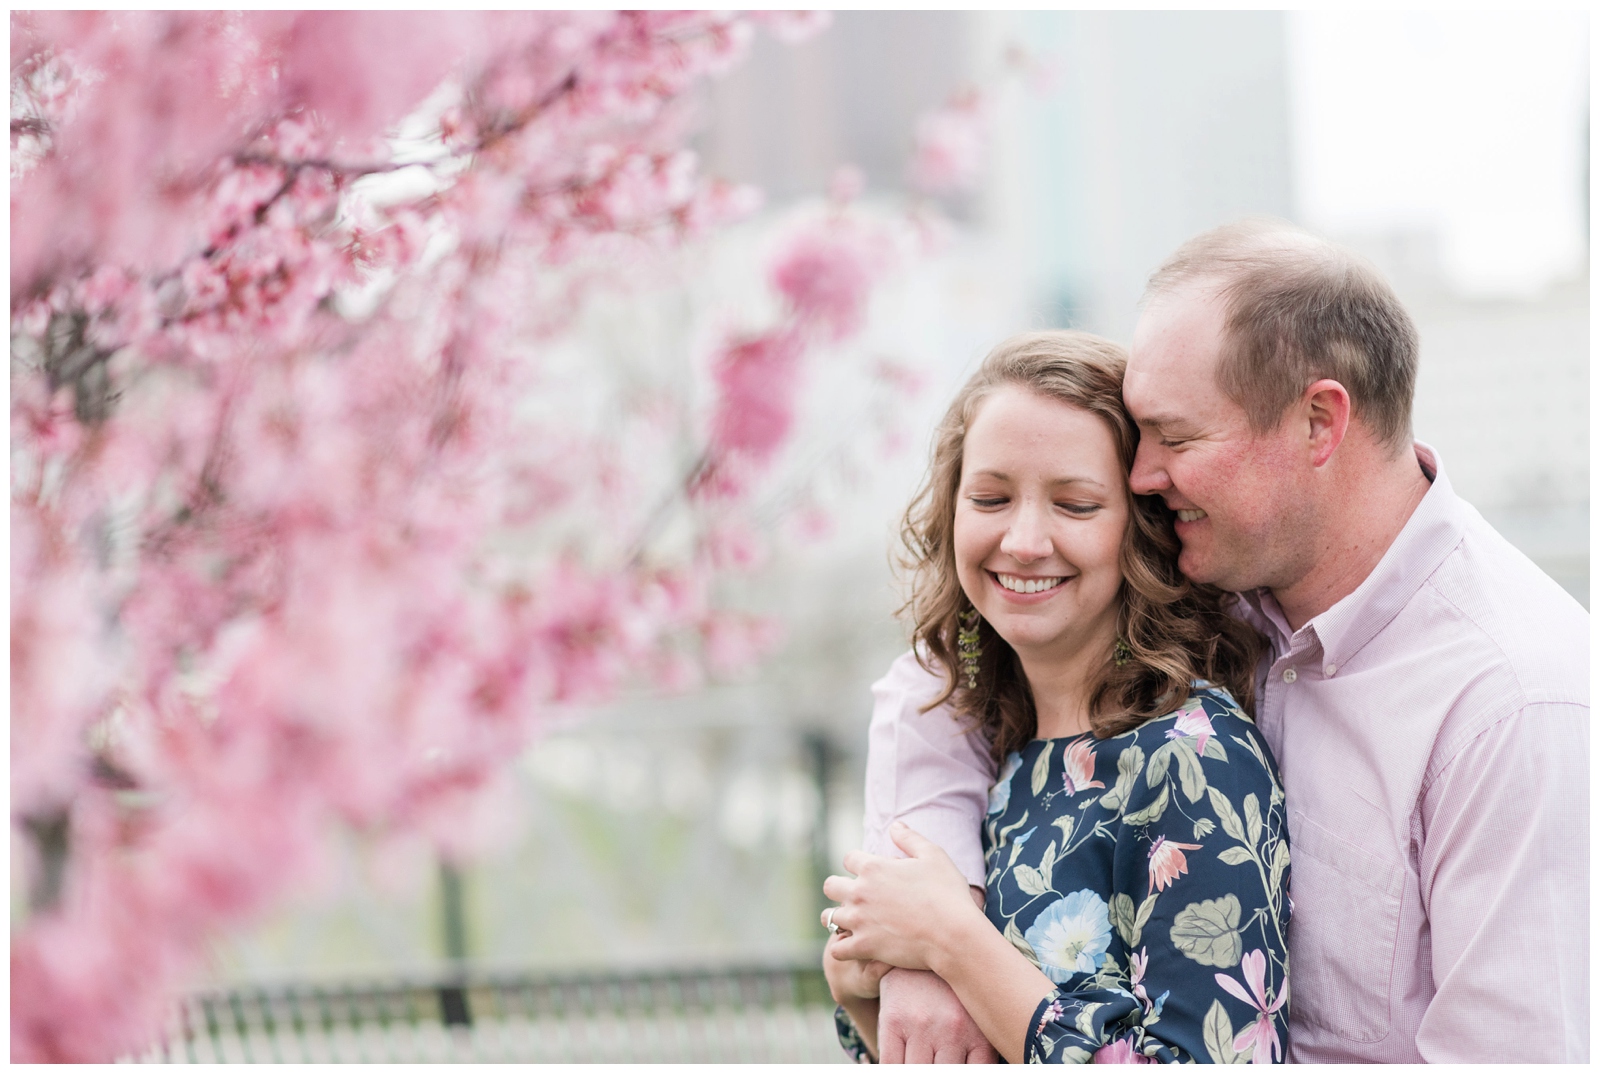 romantic spring engagement sessions at scioto mile with redbud trees blooming and the bride in an navy and pink floral dress and the groom in a pink button down shirt 